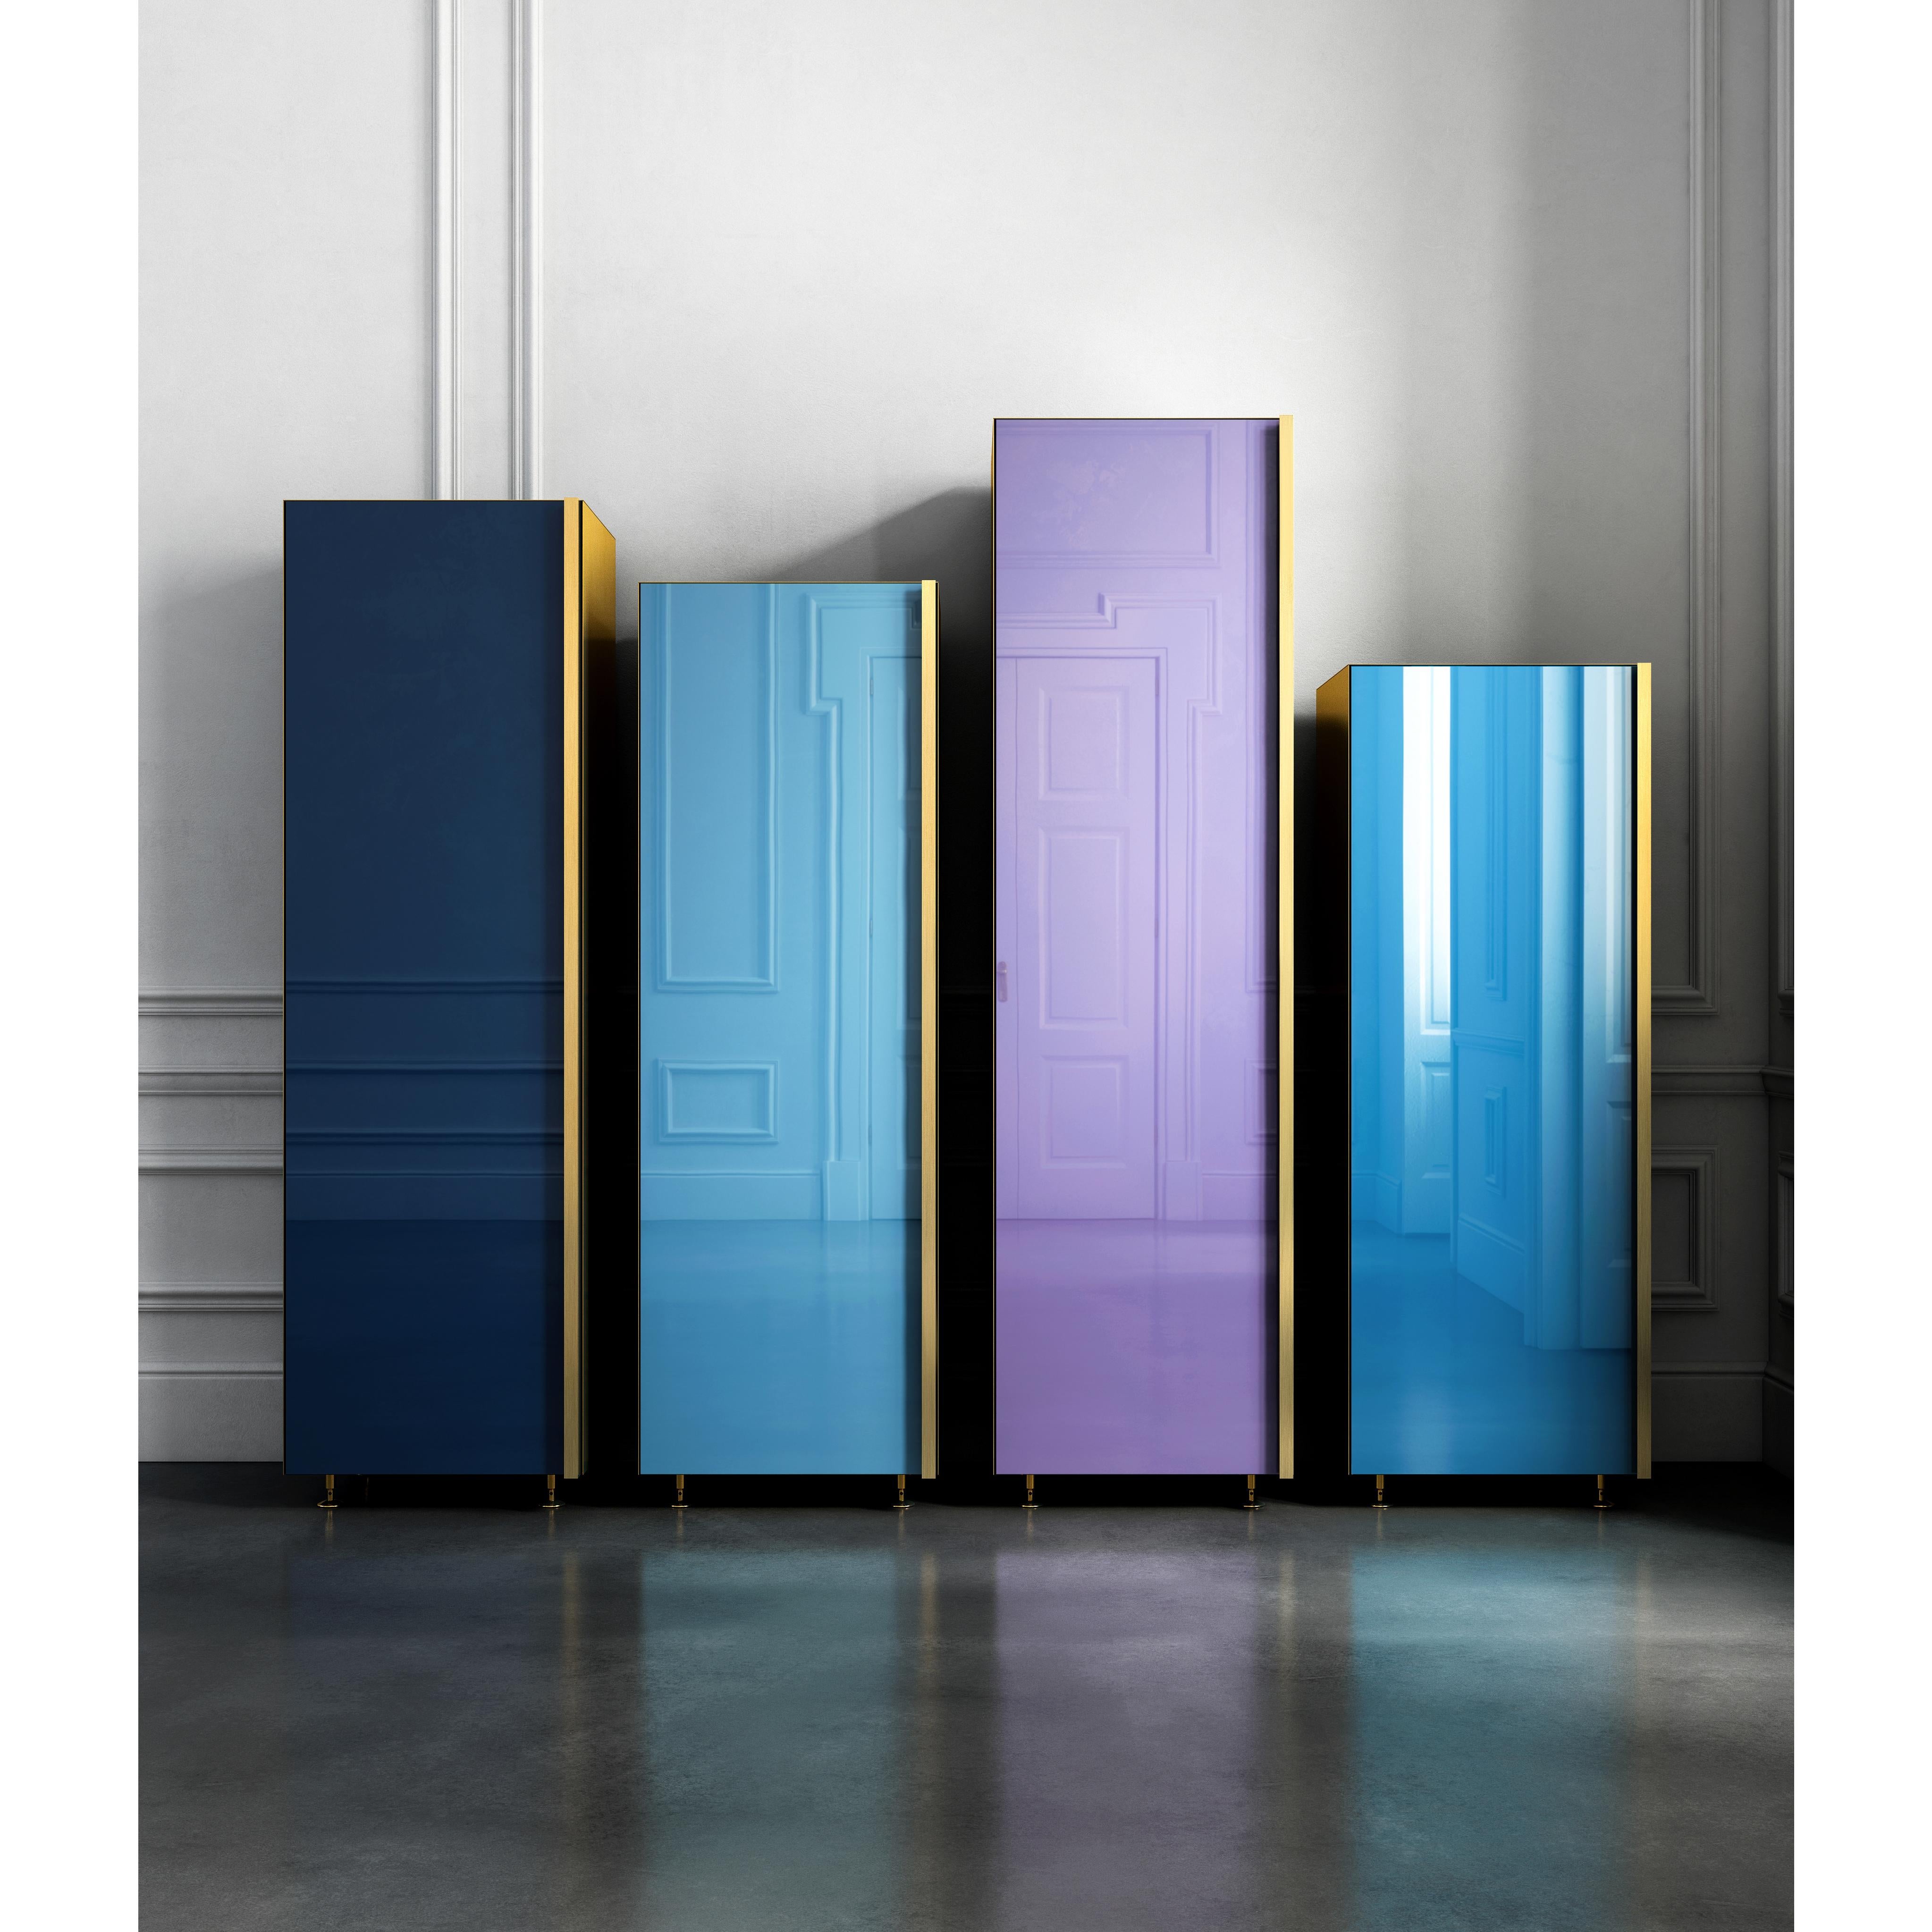 Column Set 01
Set of four separate containers with different heights. Back-painted glass door colored in blue tones, lacquered wooden interior and full height brass handle and sides. The four elements can be placed in any interior environment as